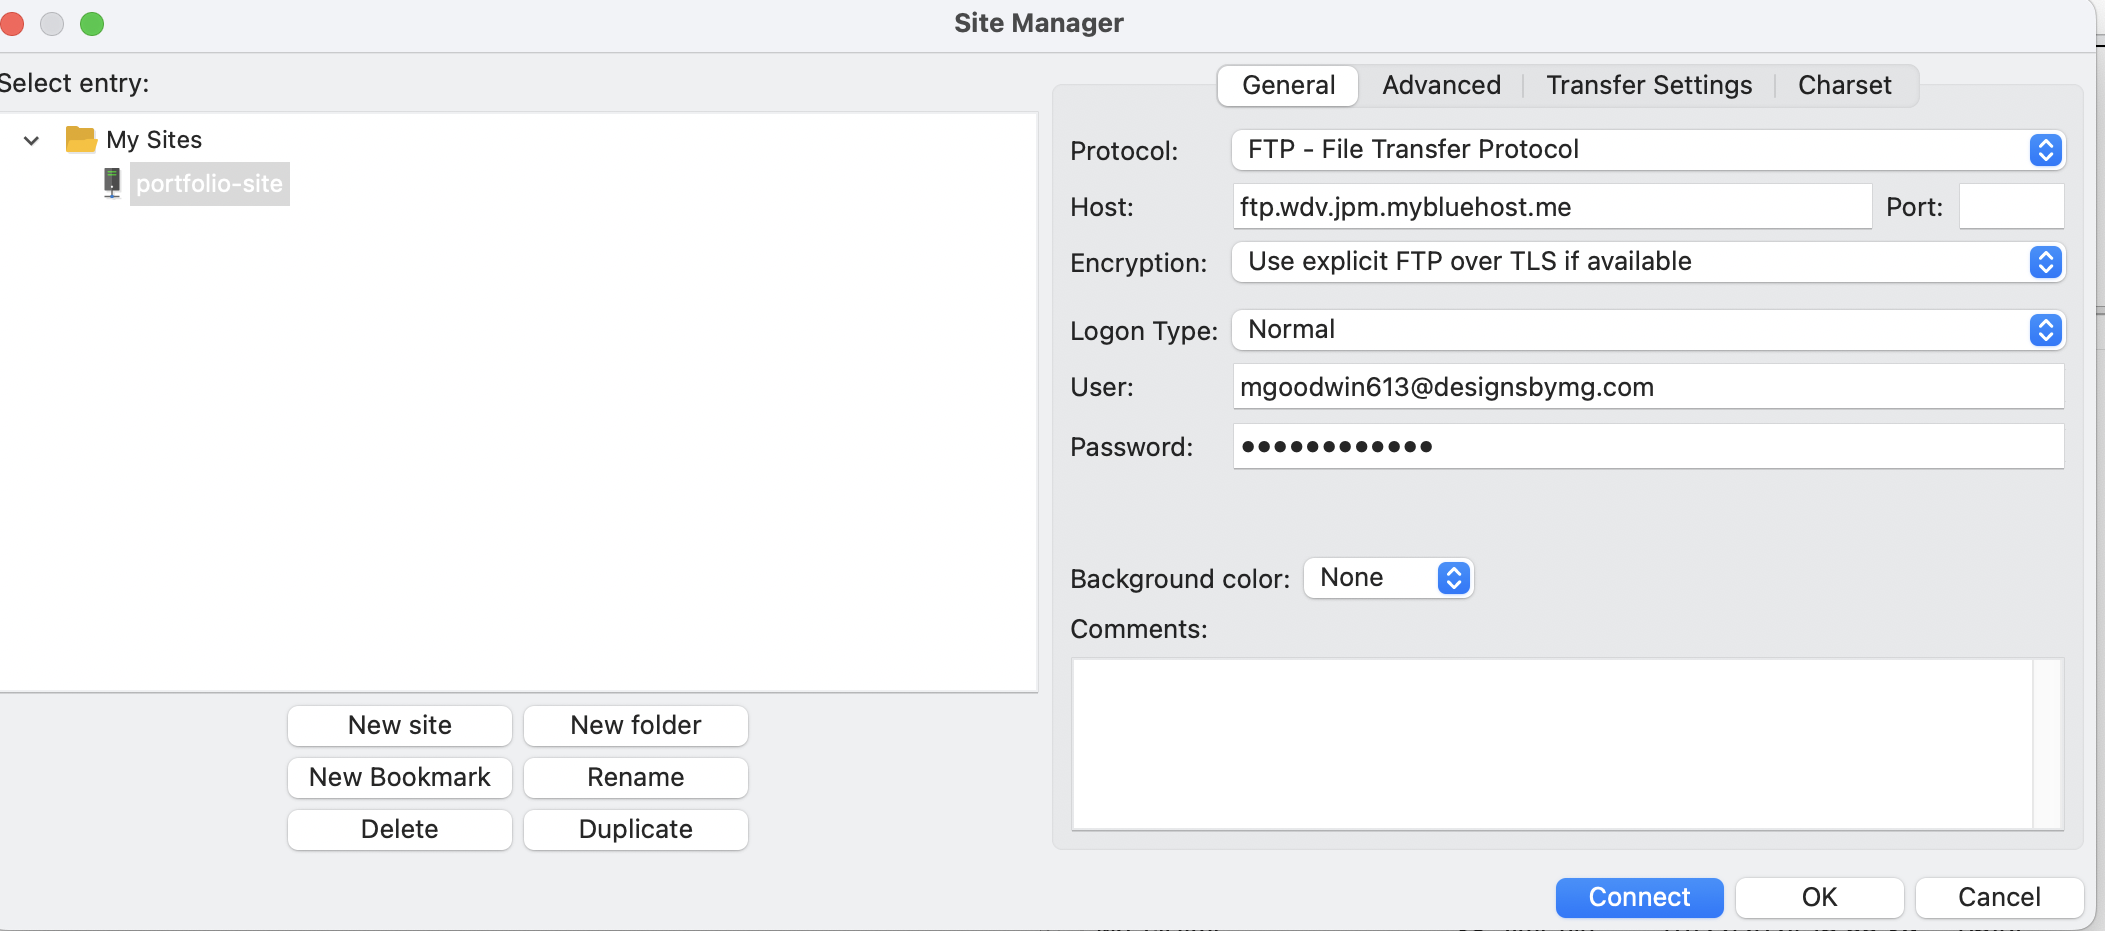 An image of the site manager interface in Filezilla that show I have set up my FTP account to connect to my hosting space